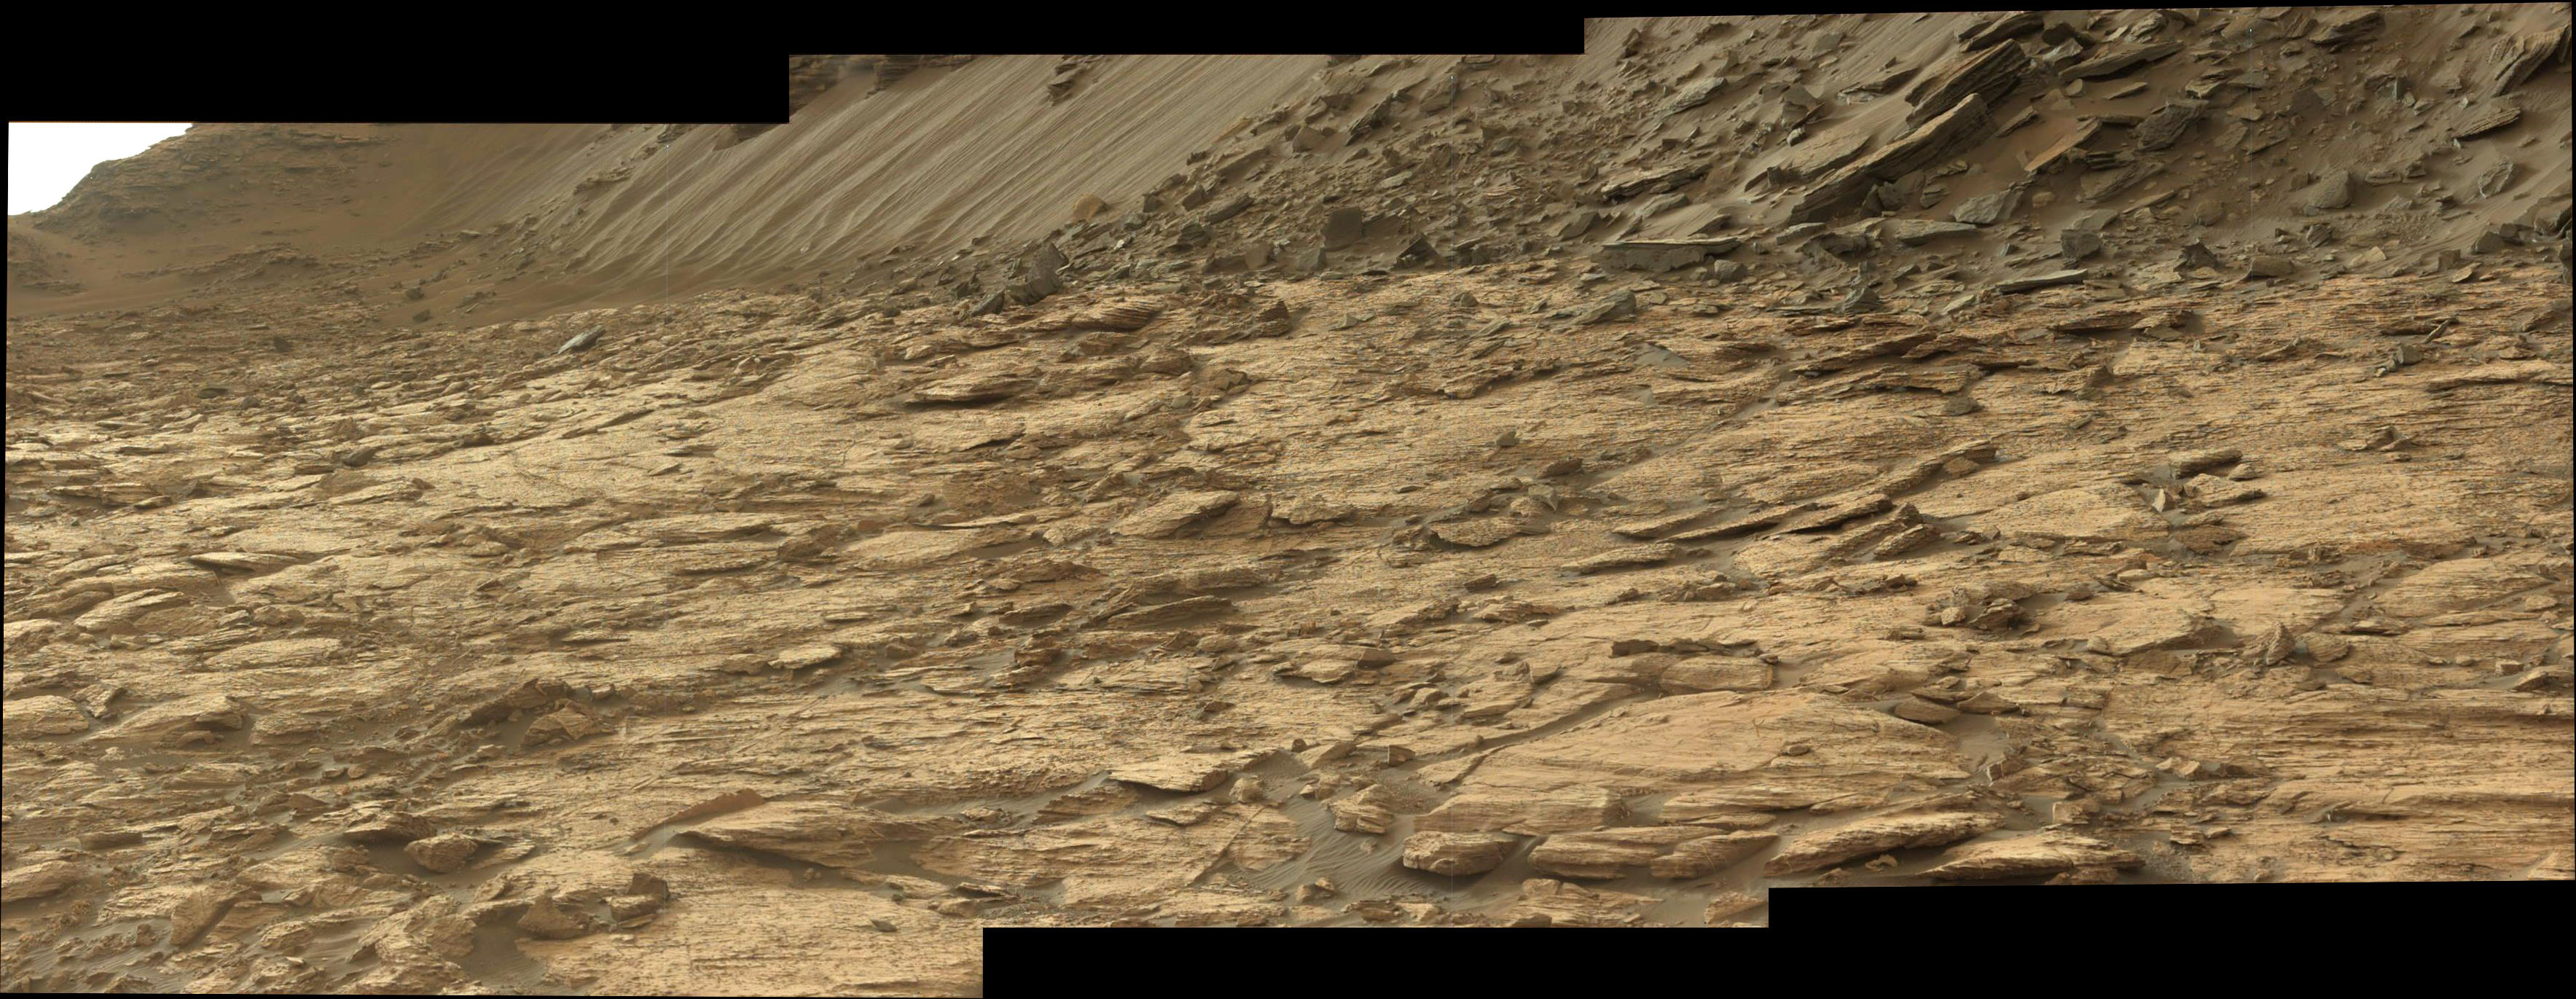 panoramic-curiosity-rover-view-3-sol-1454-was-life-on-mars